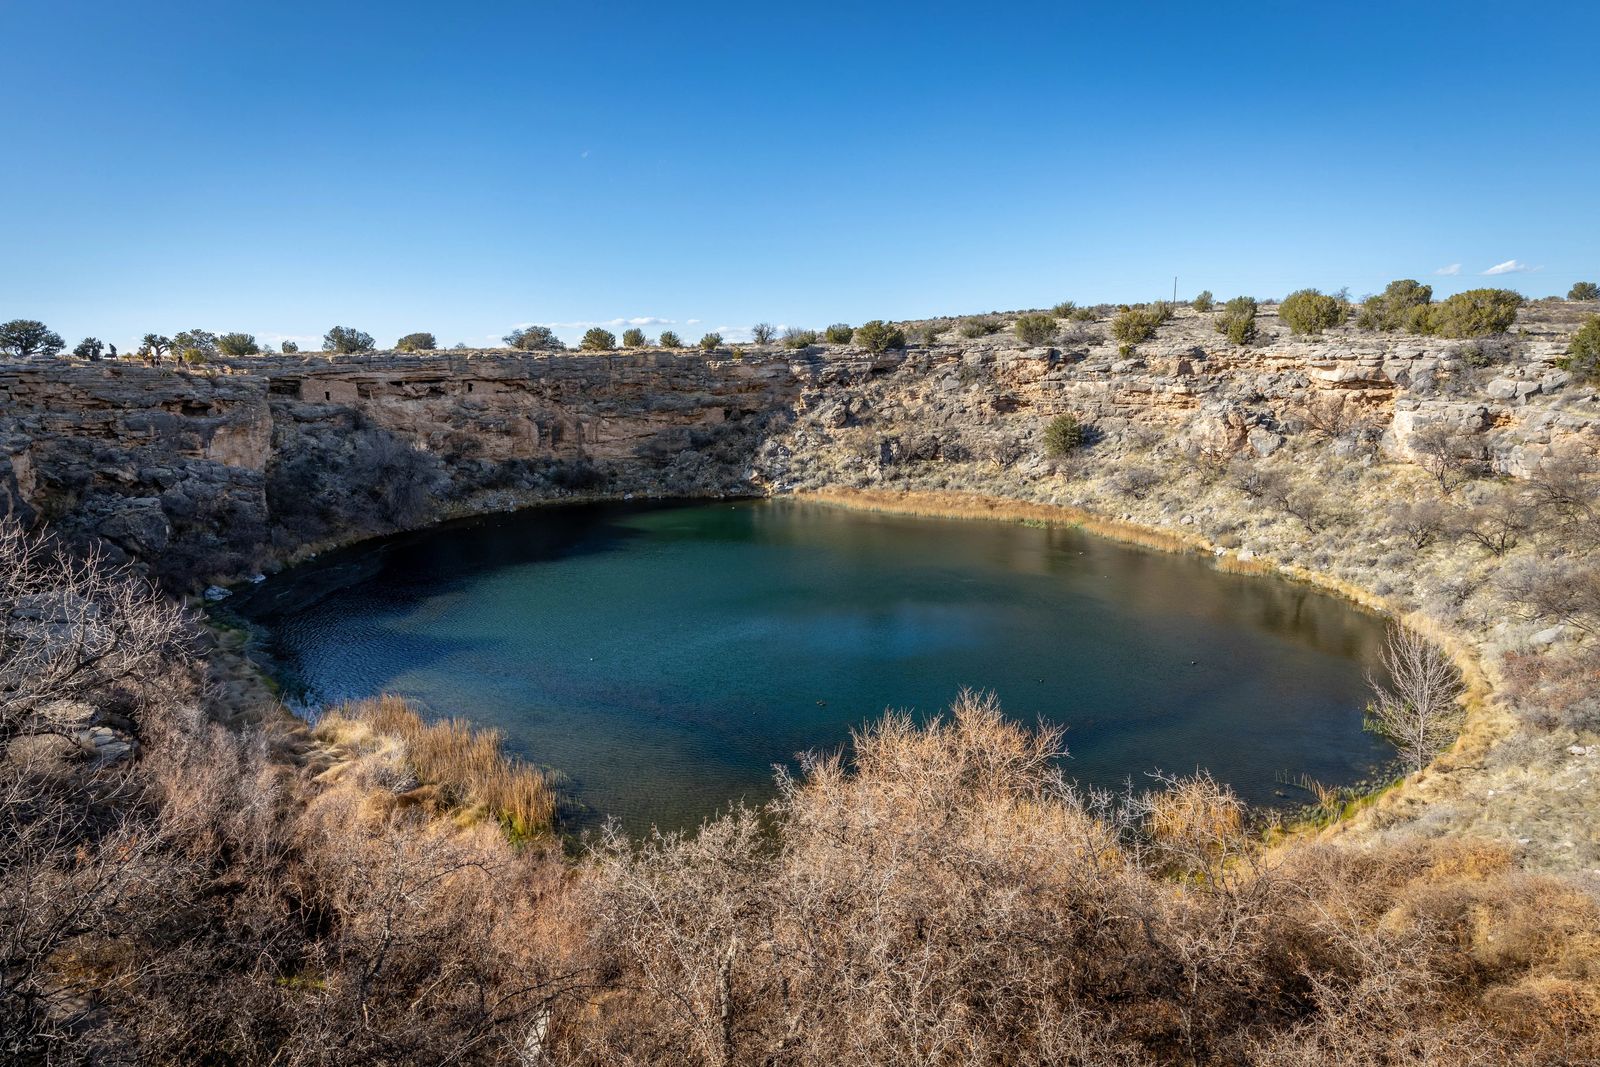 Round sinkhole with blue water - Things to do in Sedona